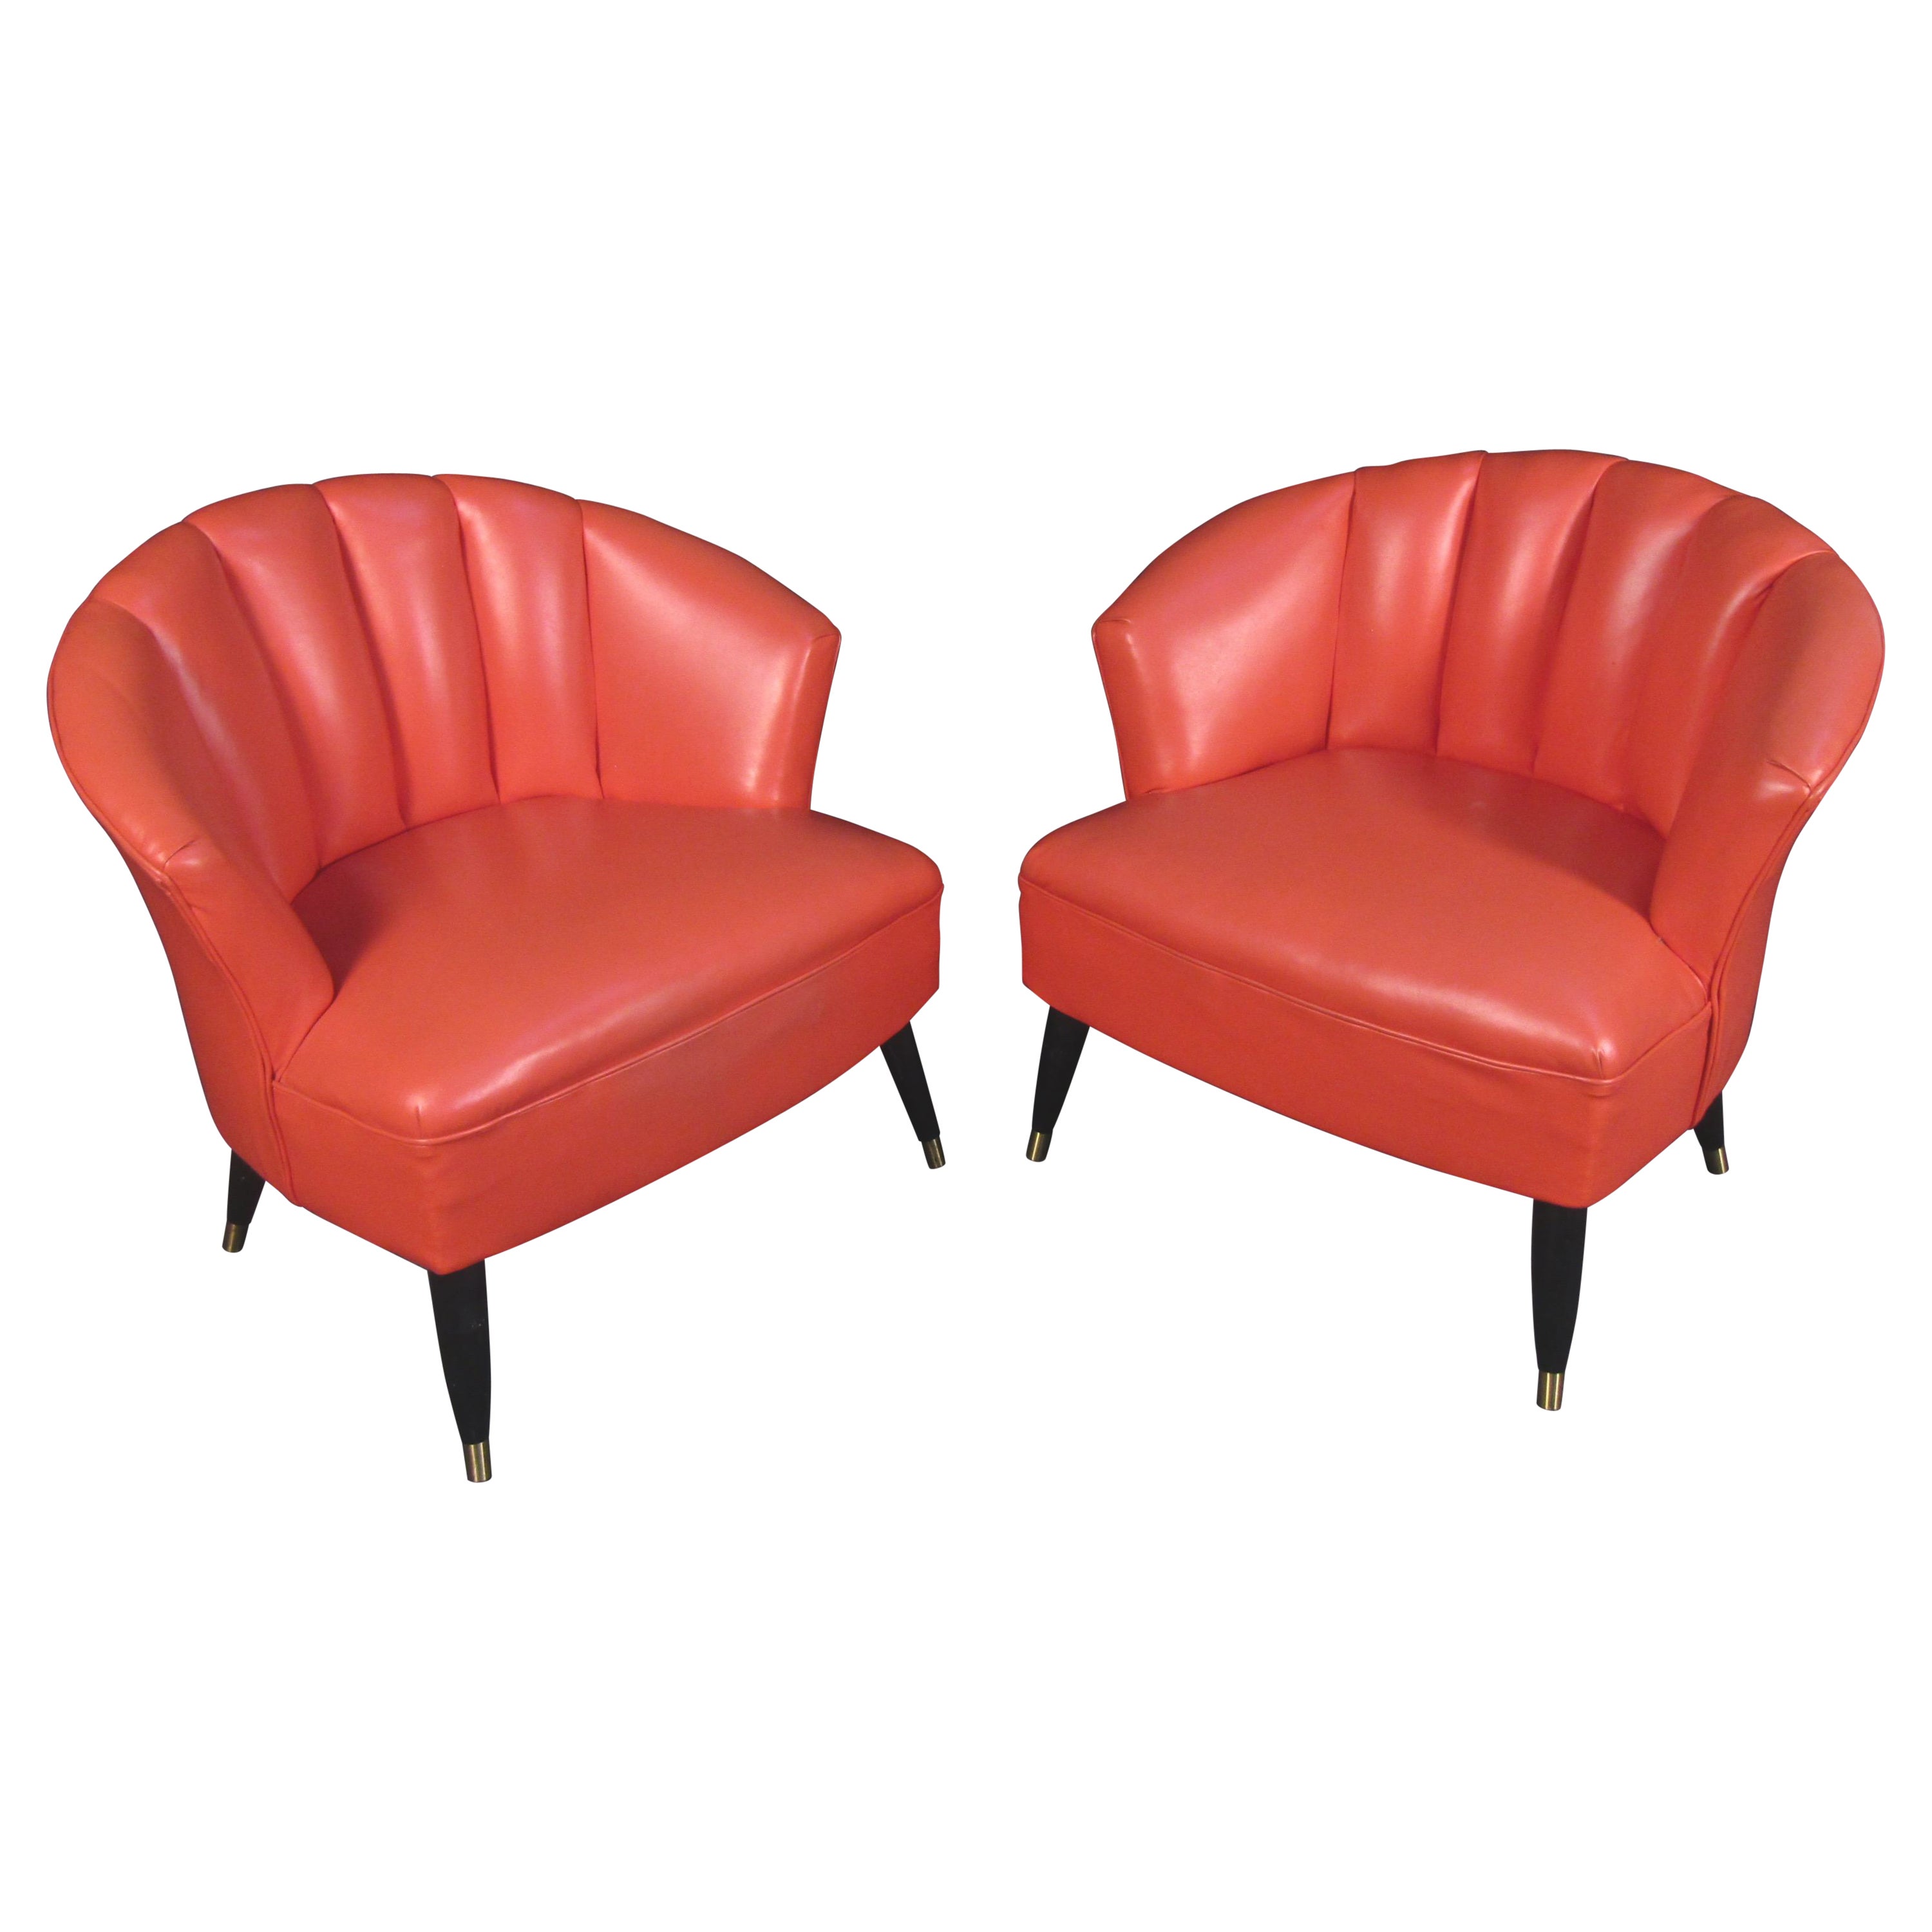 Pair of Mid-Century Barrel Chairs